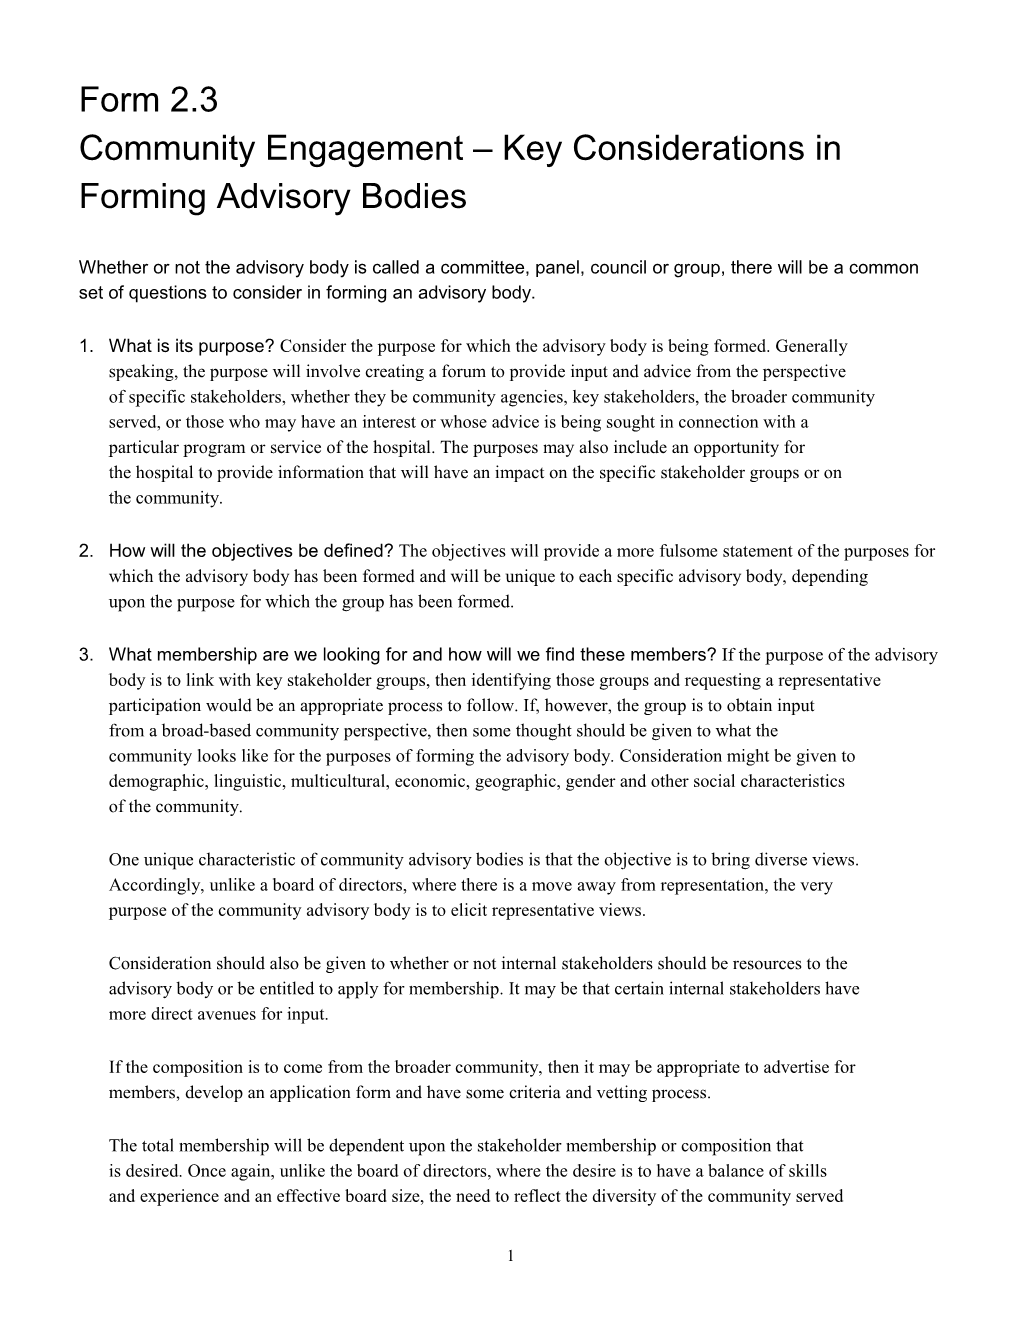 Community Engagement Key Considerations in Forming Advisory Bodies